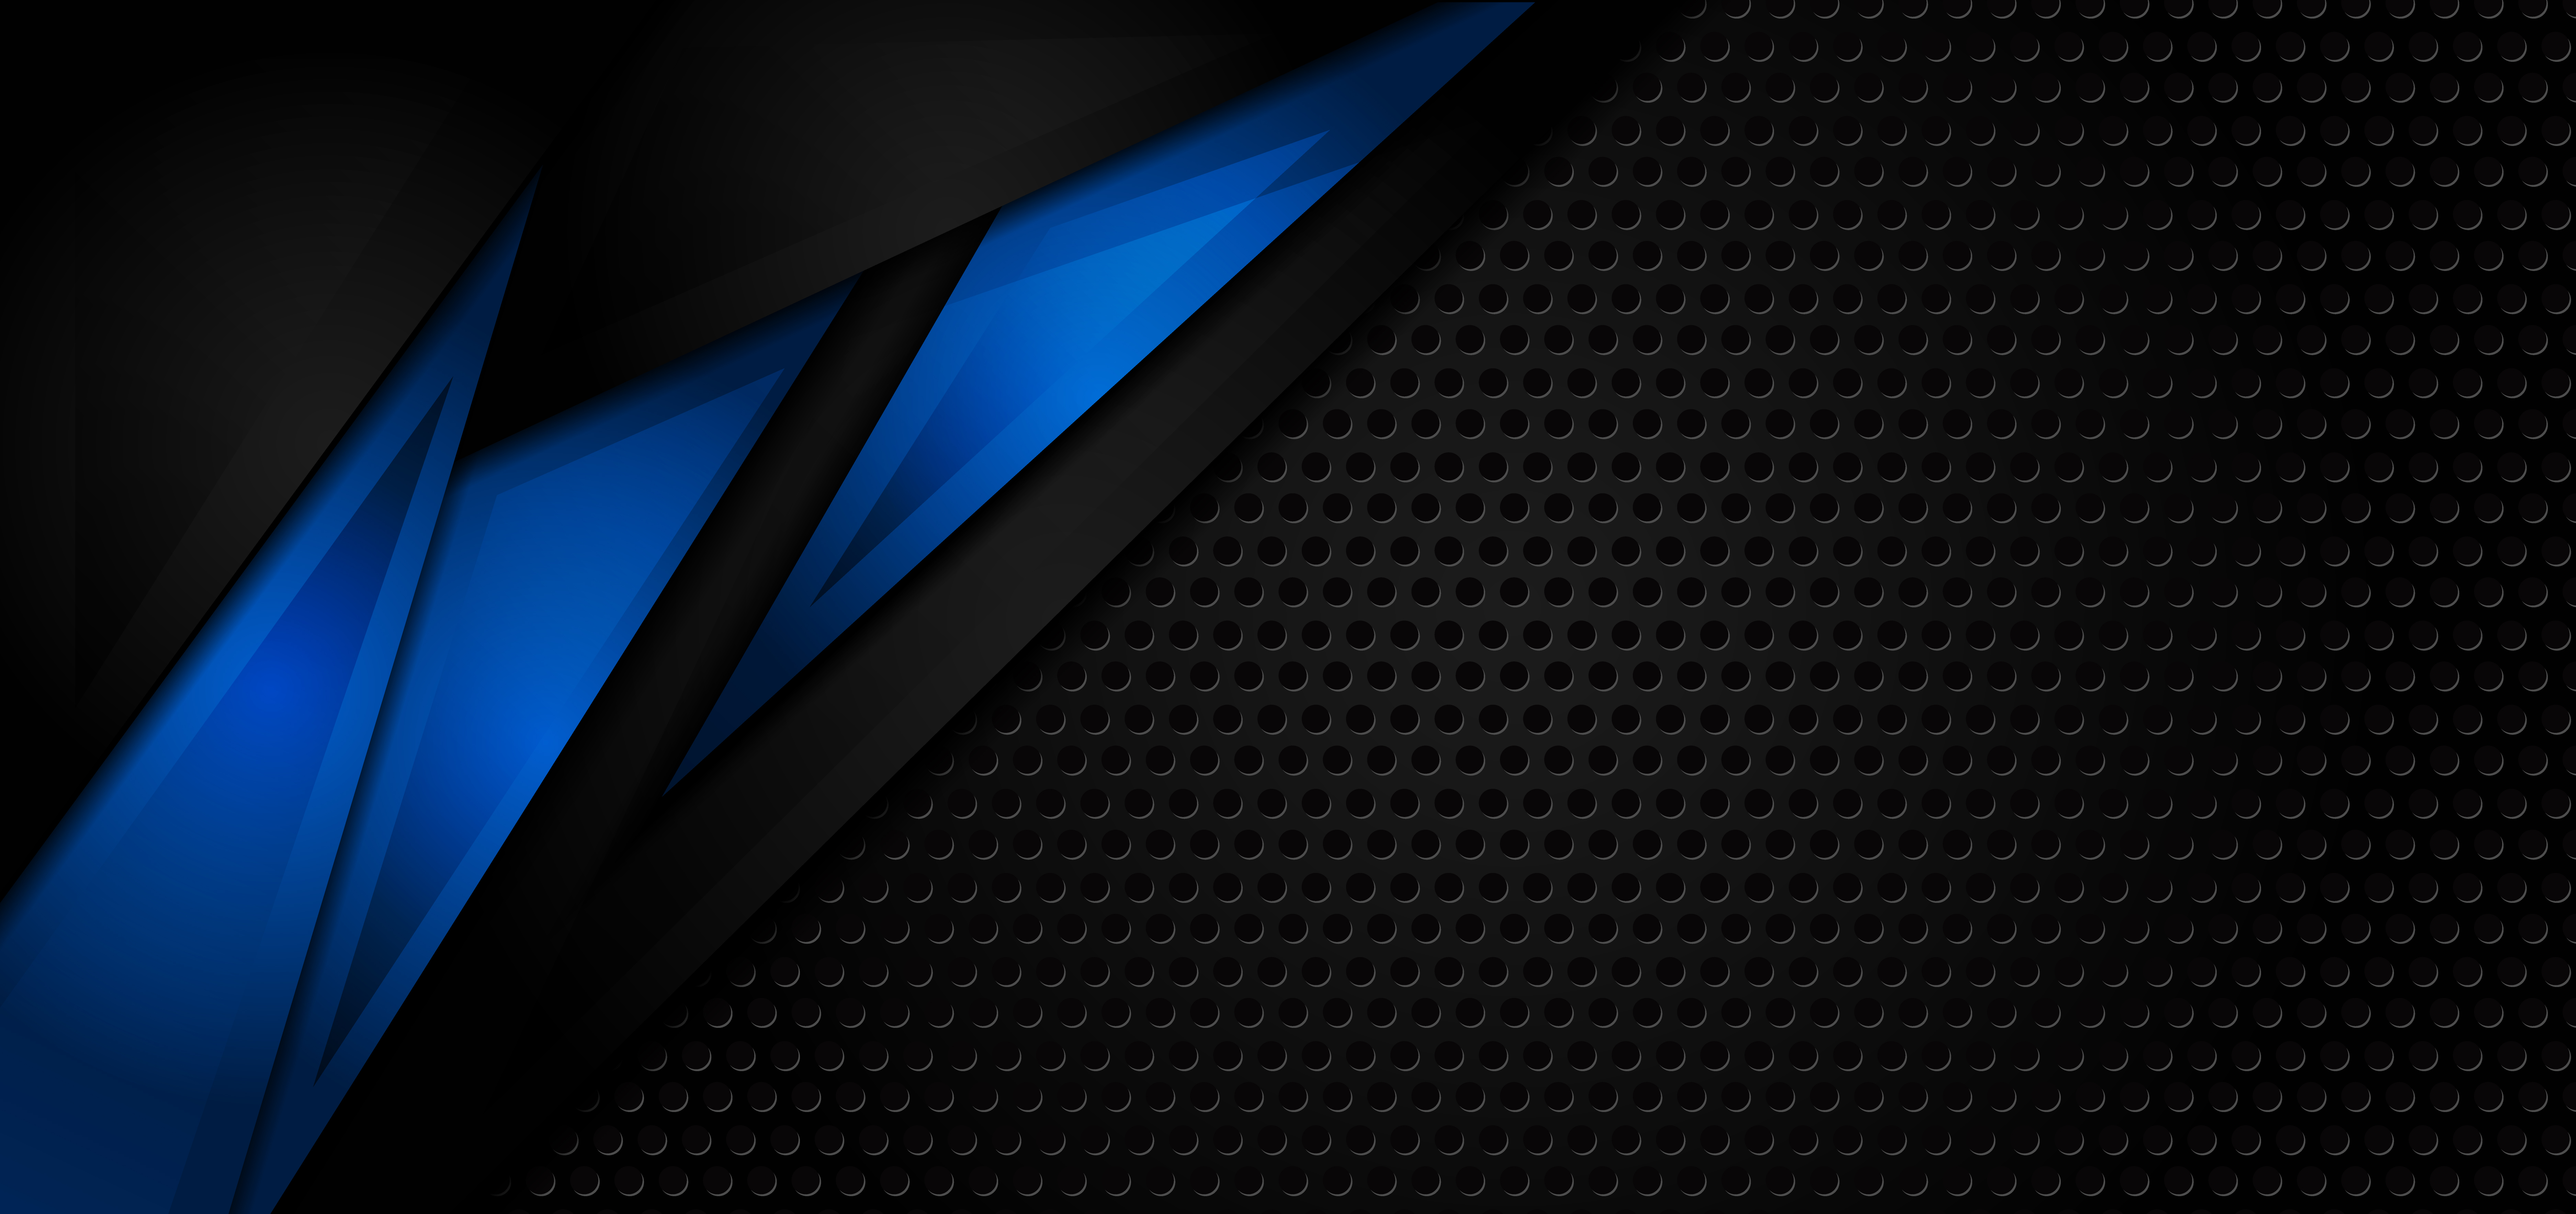 Details 100 blue and black background hd